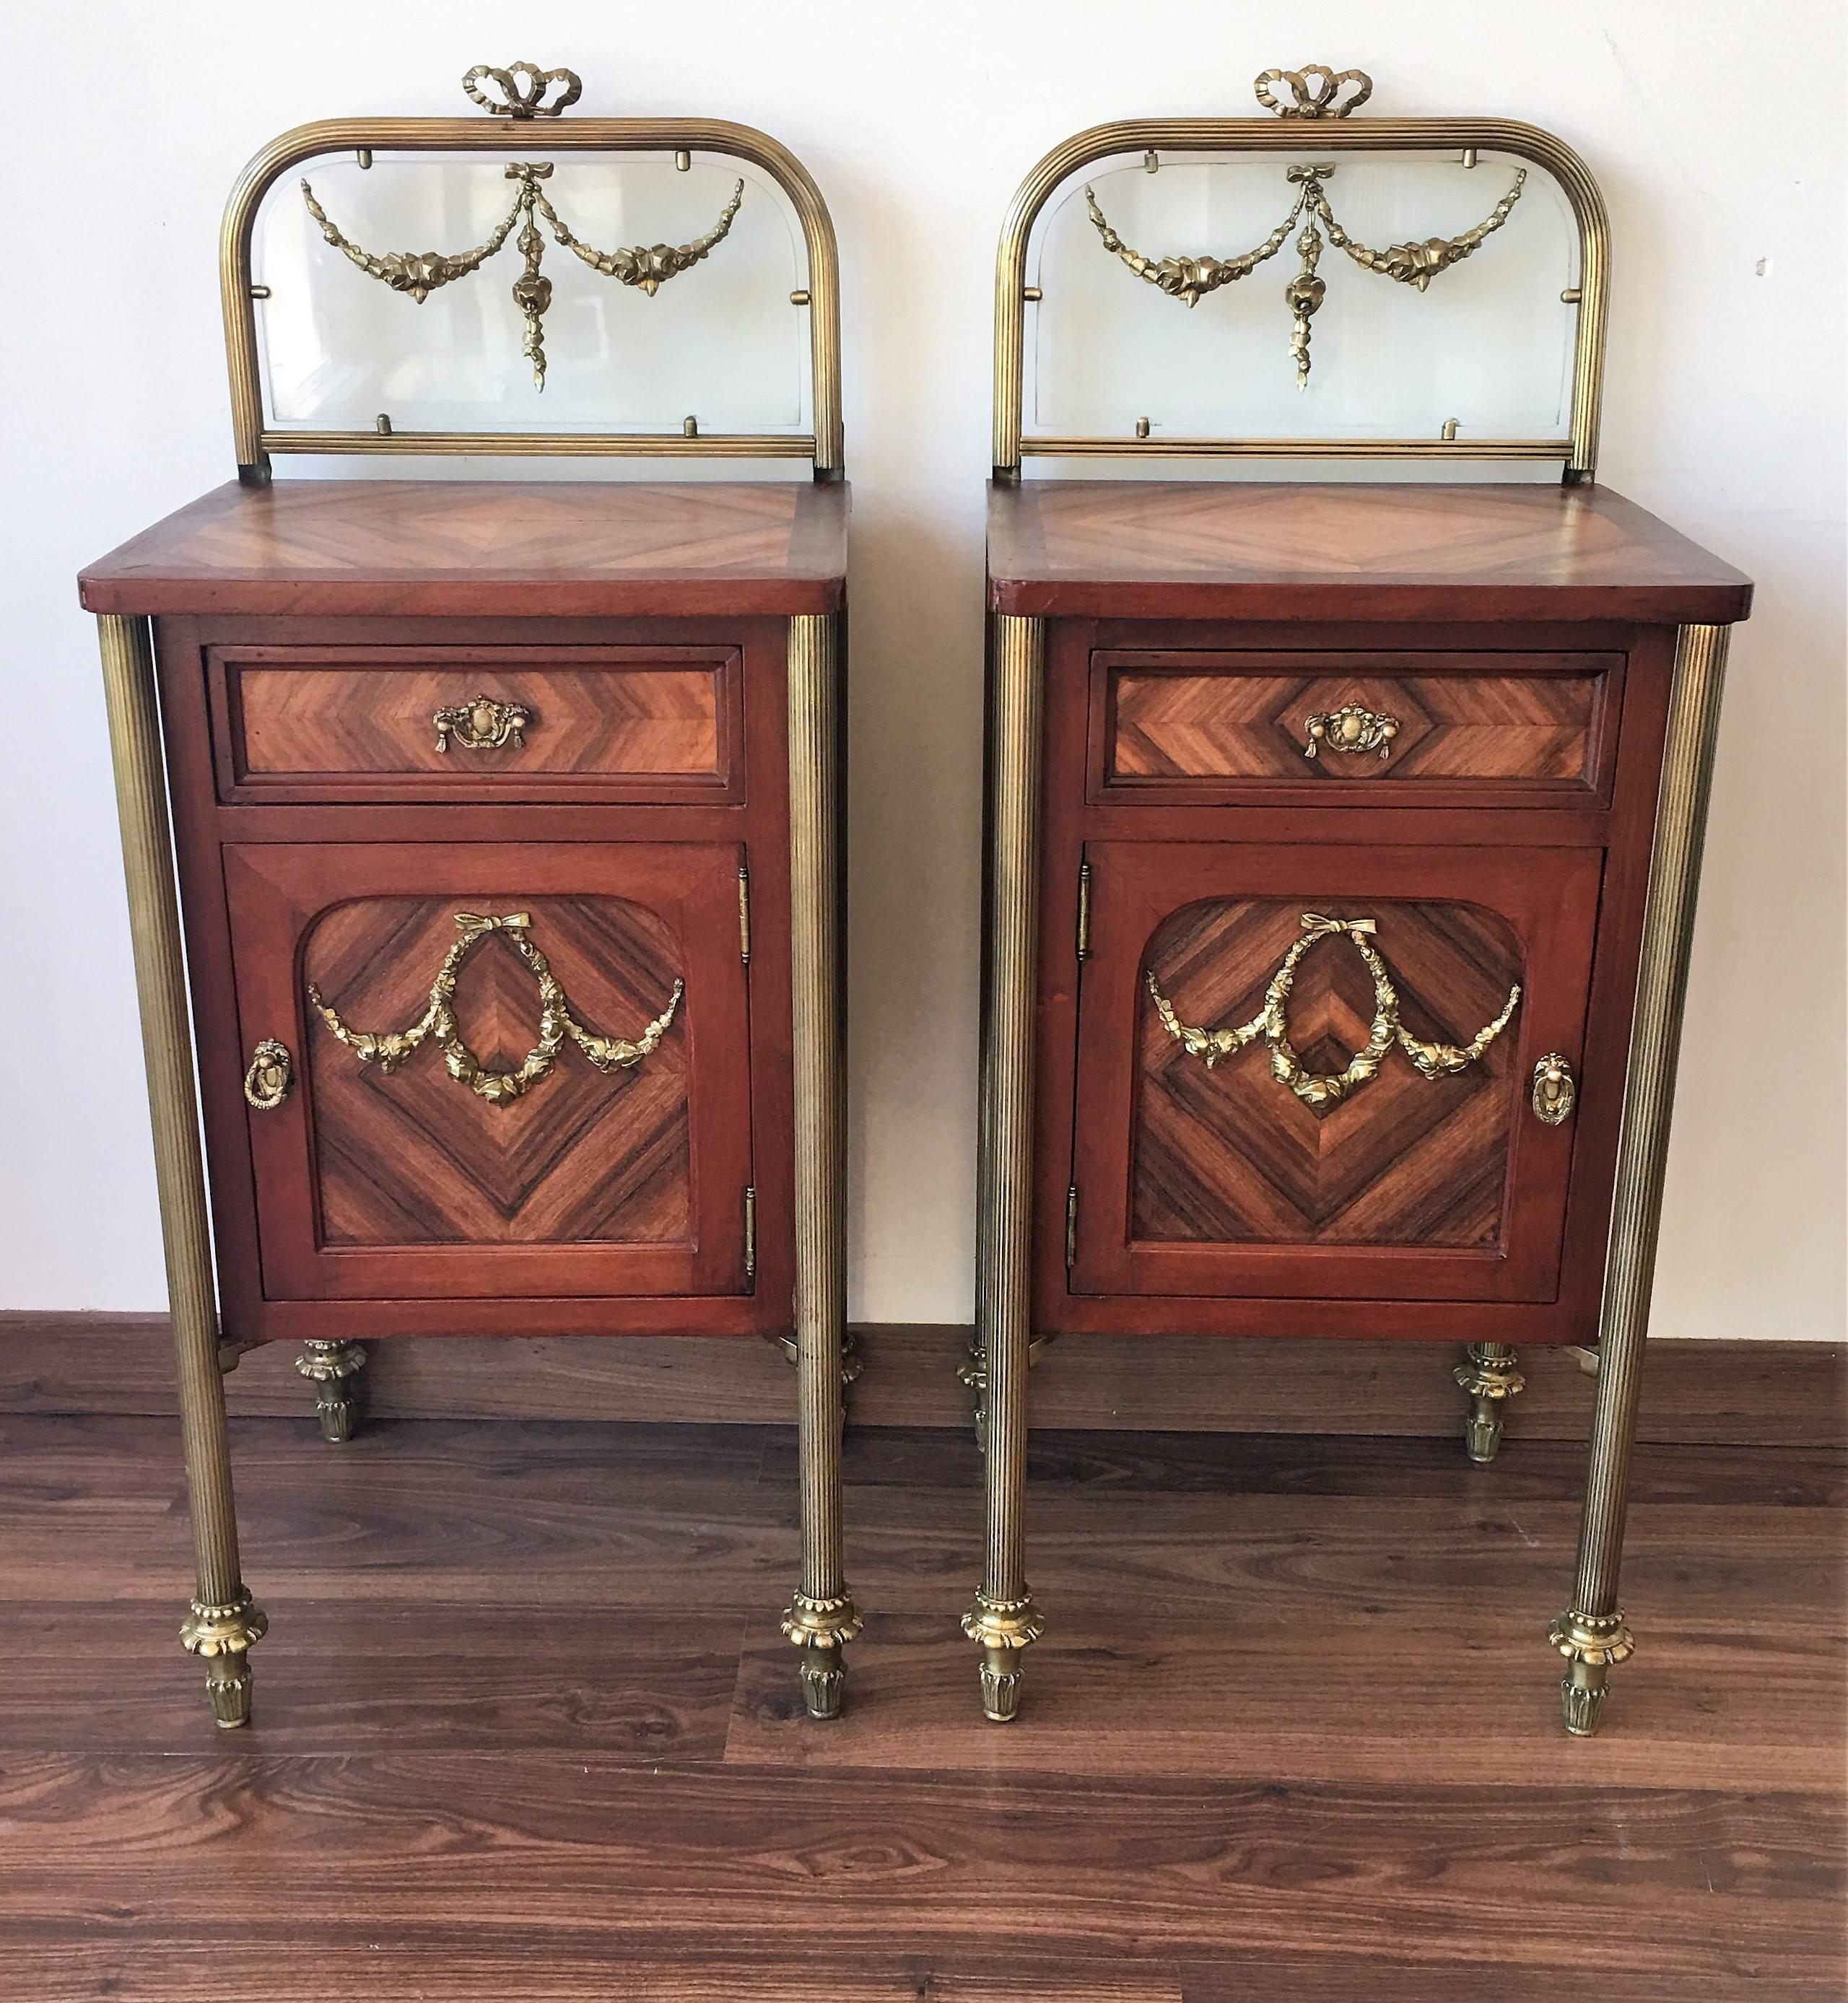 Pair of marquetry nightstands with glass crest and bronze legs
Beautiful marquetry top and original bronze handles and garniture
Completely restored.
Total Height : 37in
Height to the tabletop: 27.55in